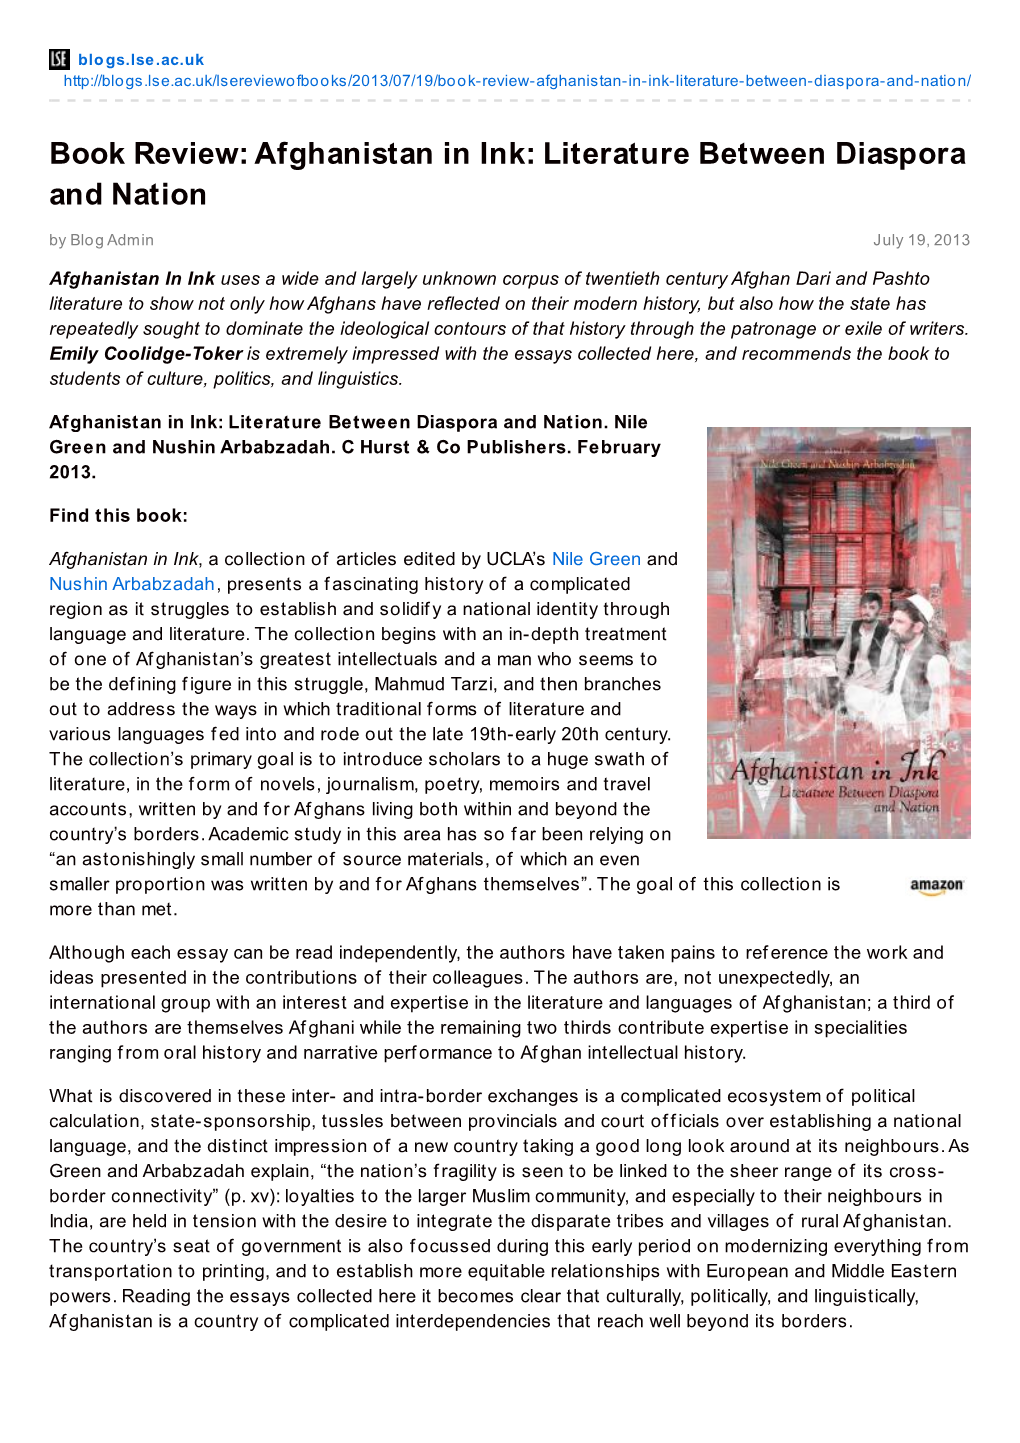 Afghanistan in Ink: Literature Between Diaspora and Nation by Blog Admin July 19, 2013